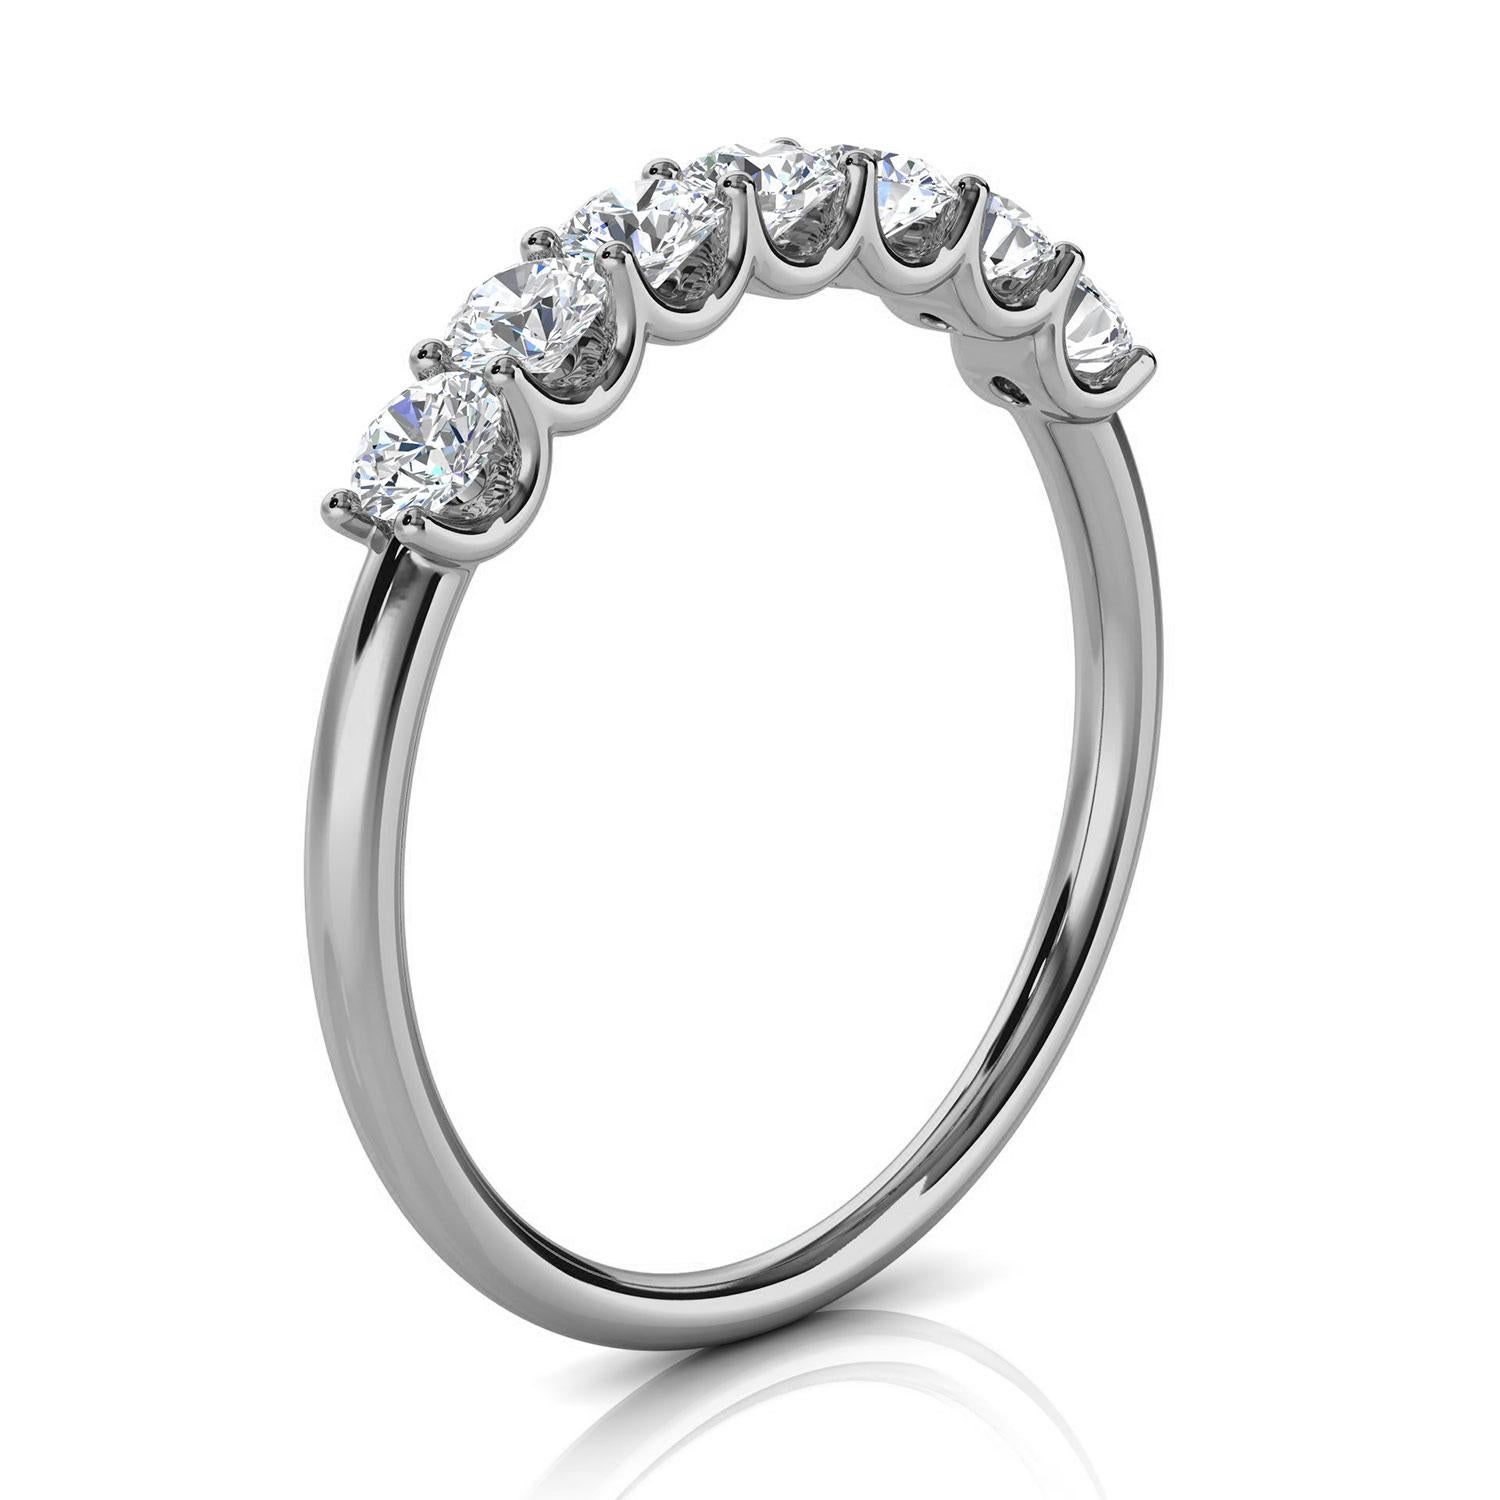 This Delicate ring features Seven (7) floating Brilliante round diamonds set in 